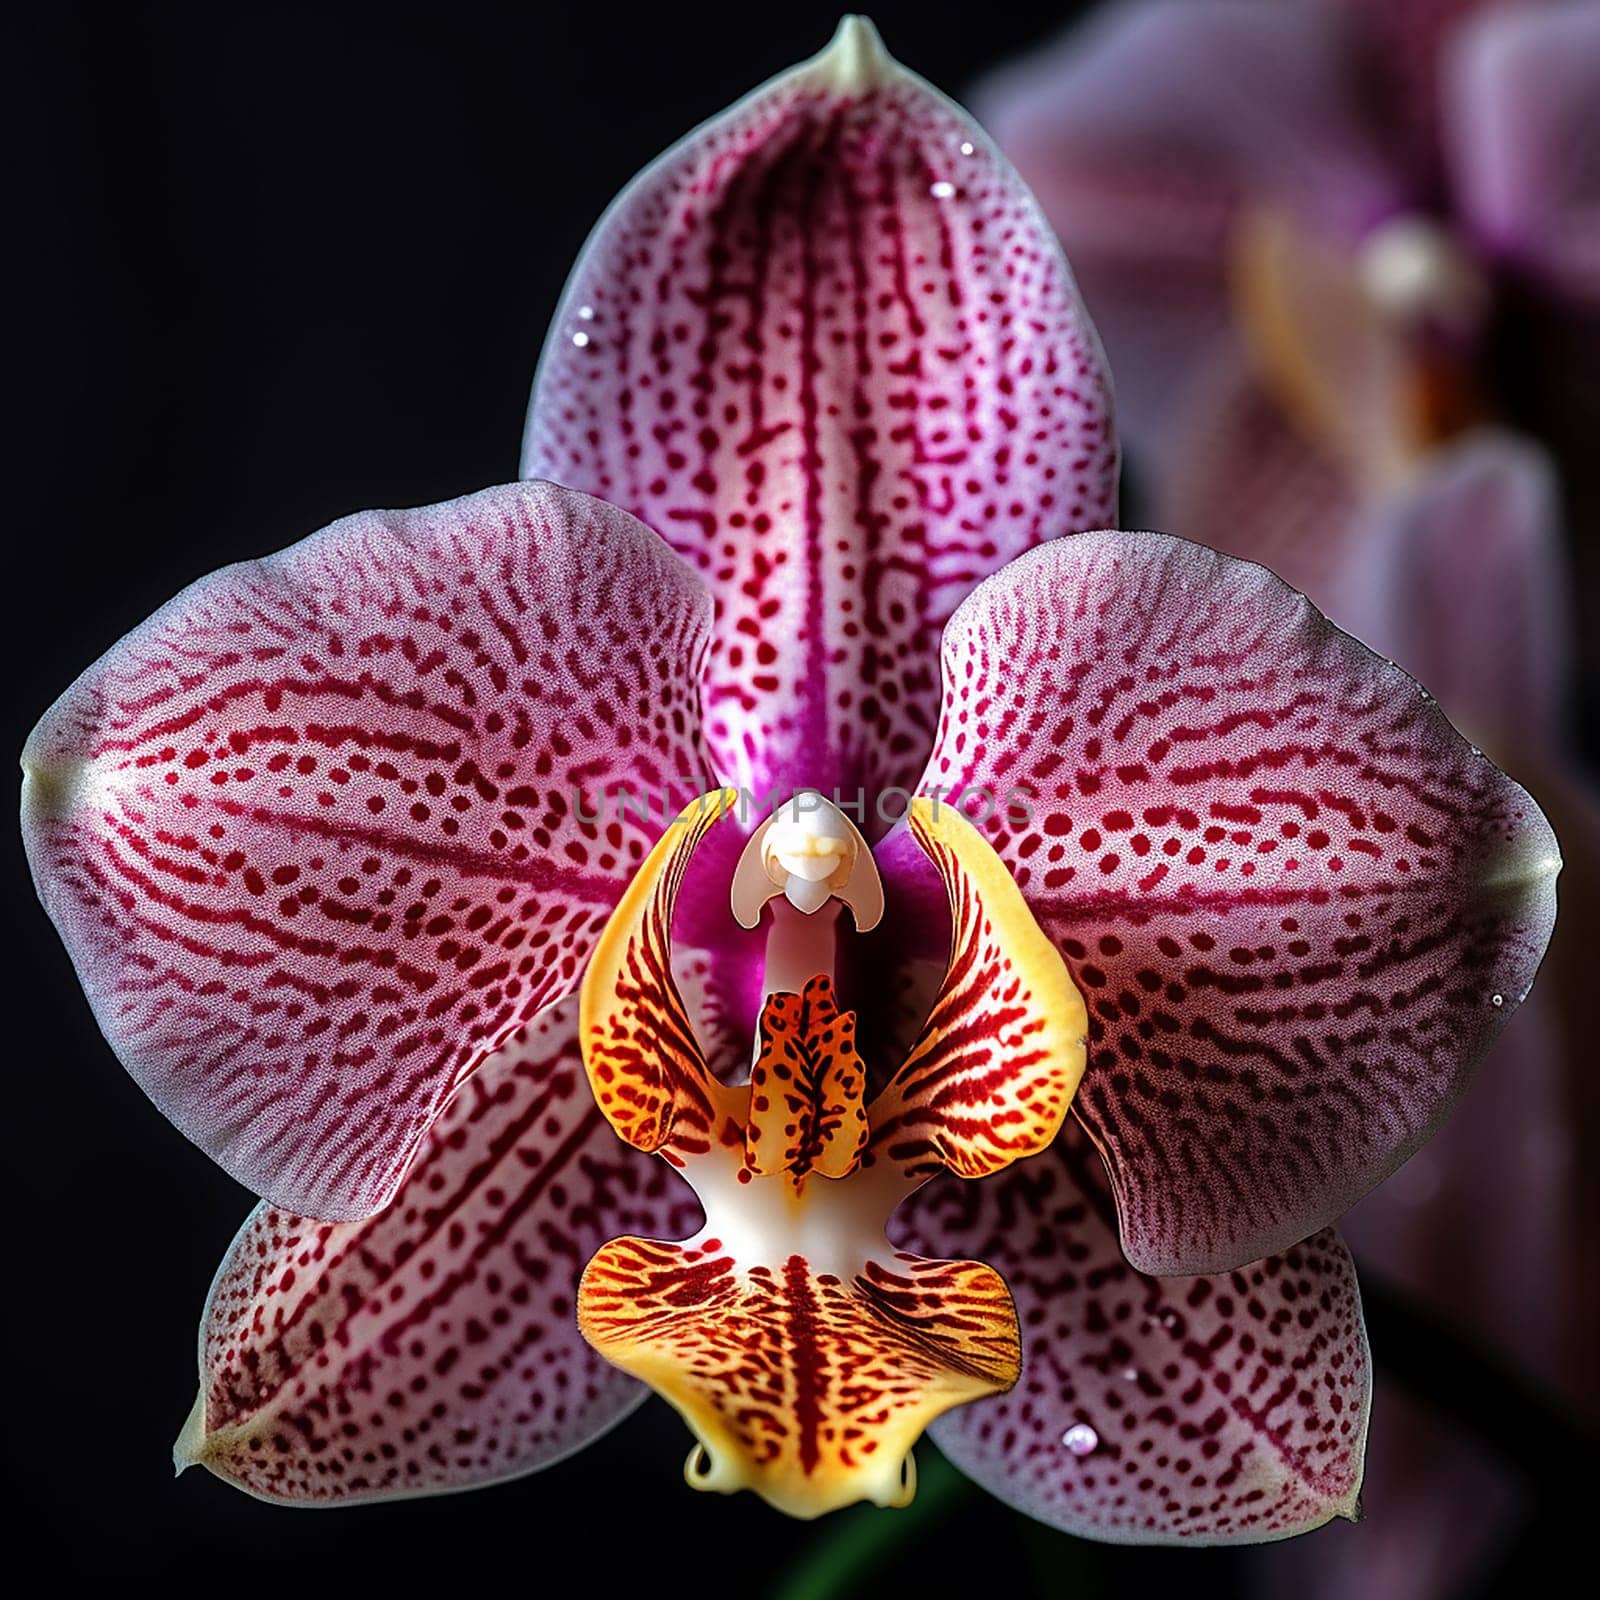 Close-up of a spotted pink and white orchid with a dark background